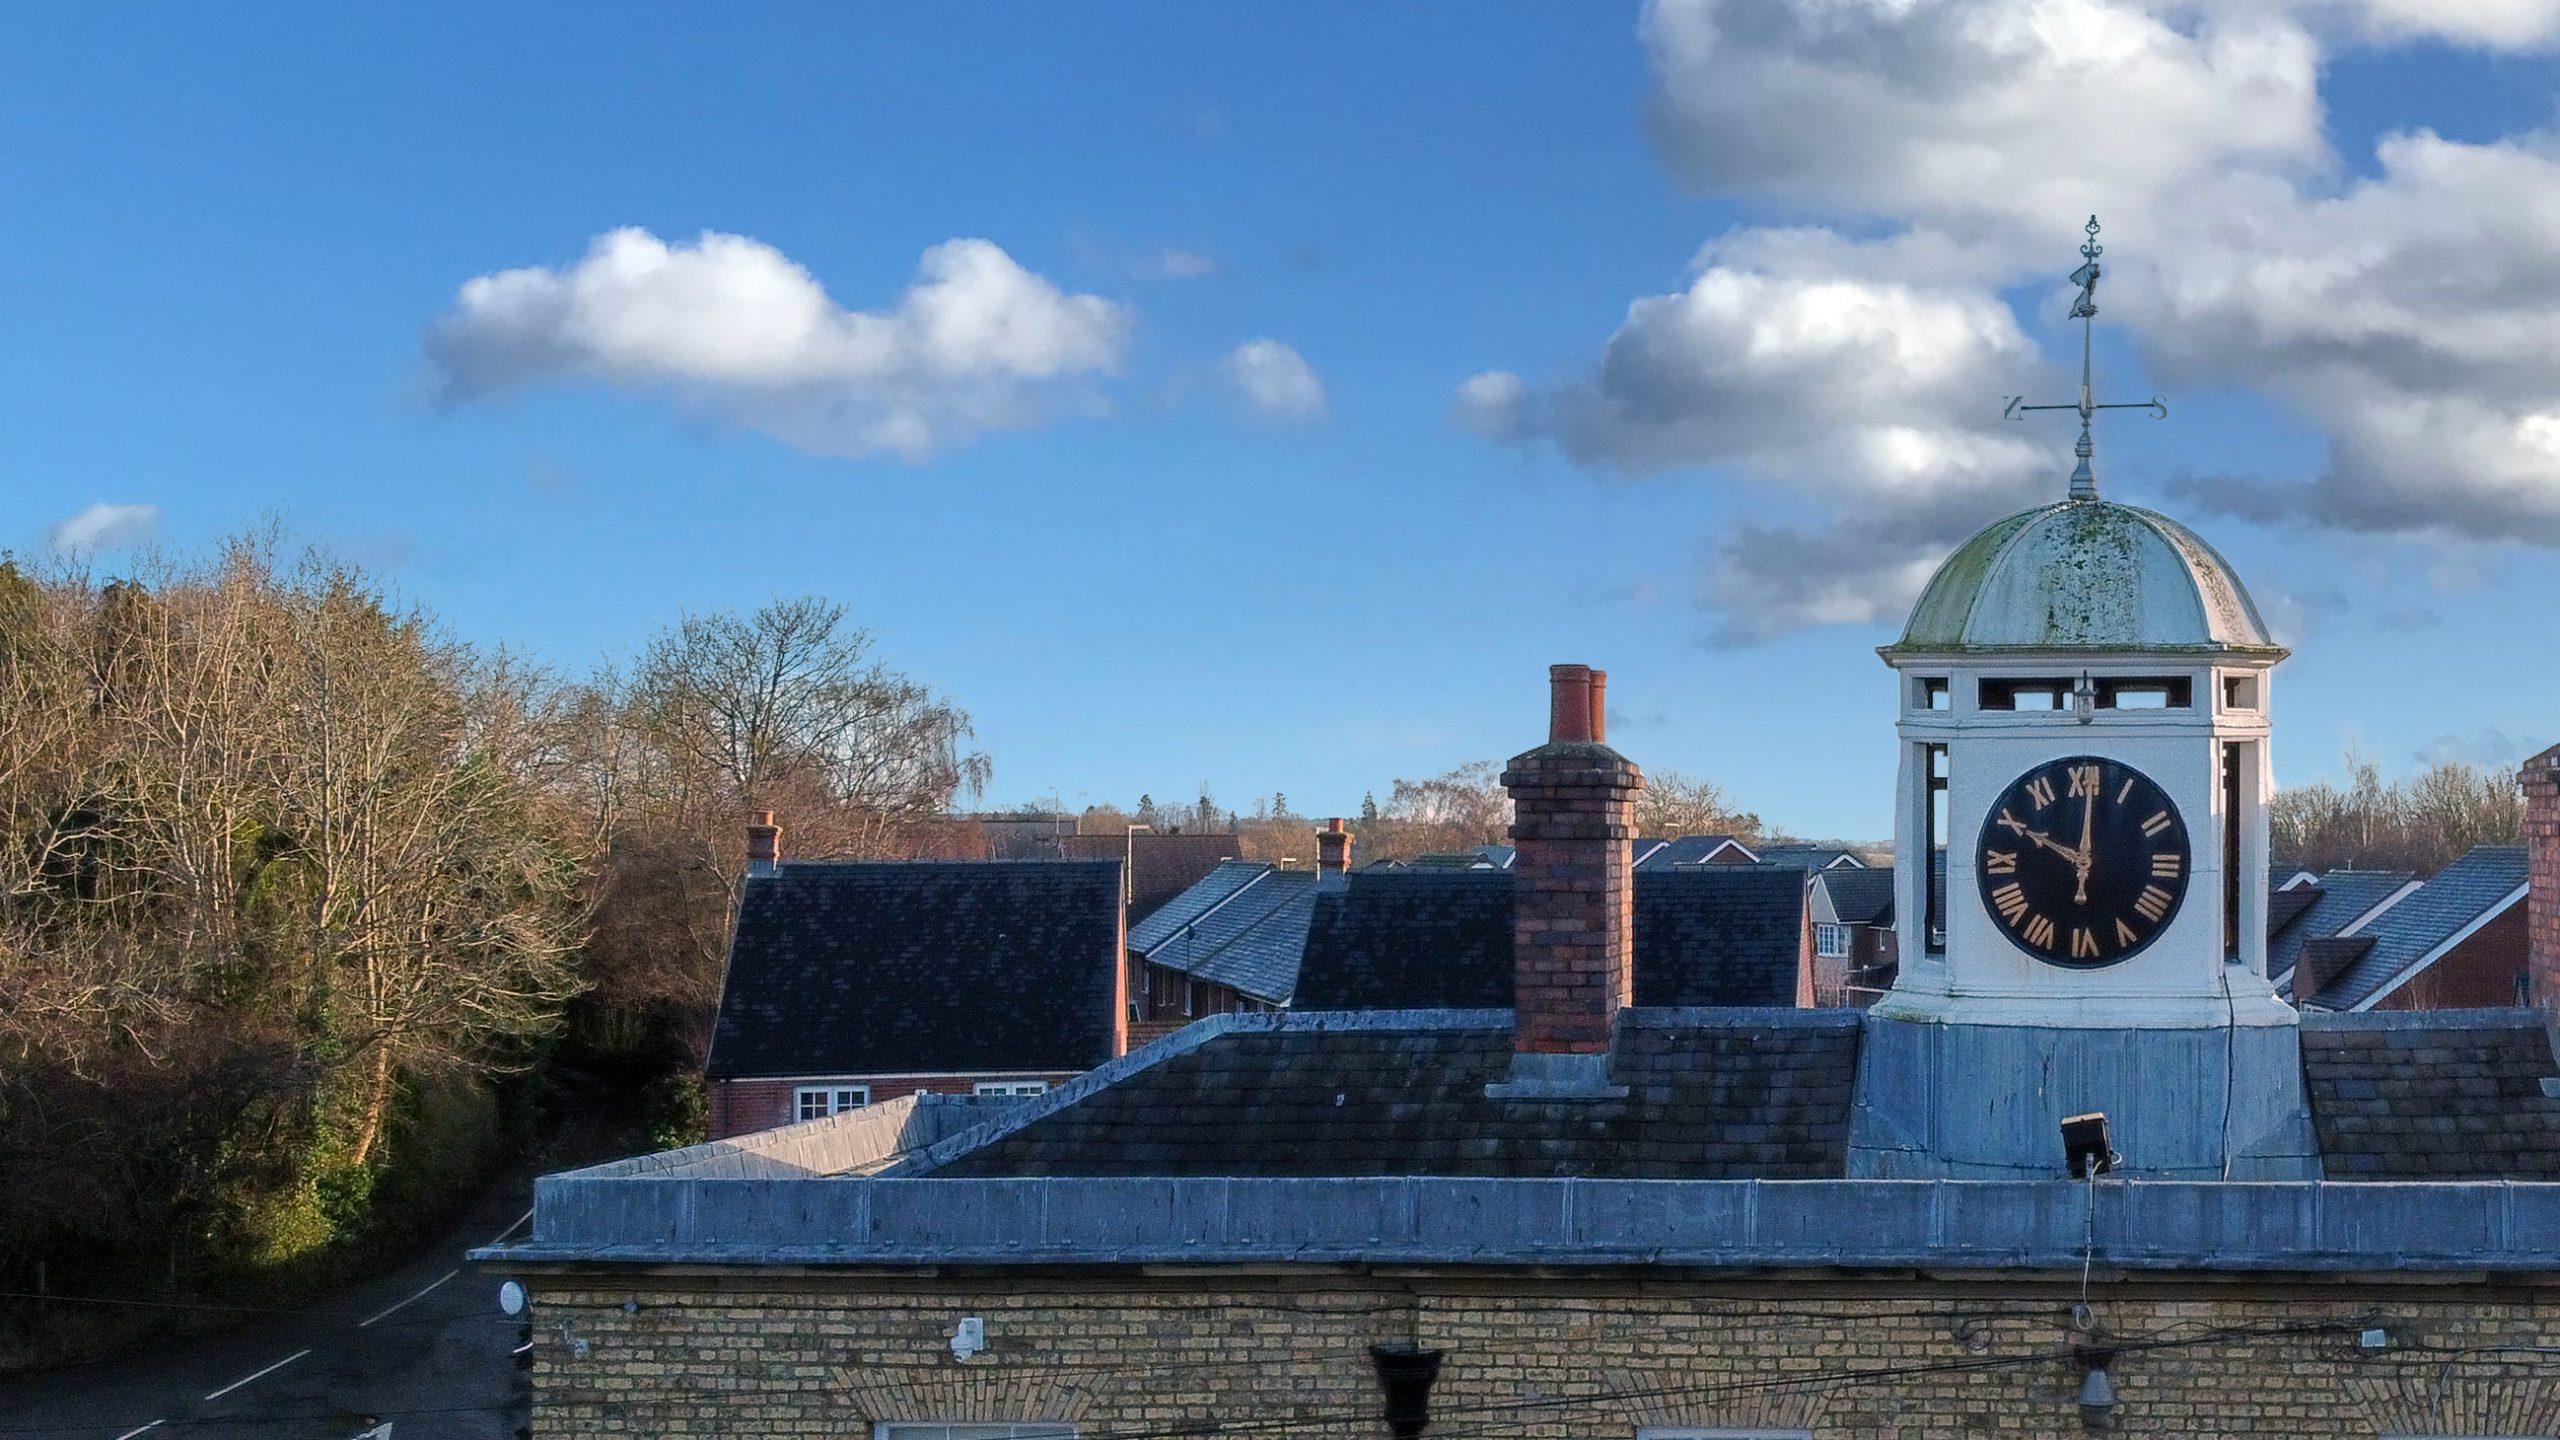 A roof level image of the East Lodge Gate House of the Royal Ordnance Depot, Weedon. Built in 1802. Showing hipped slate roof with cupola clock.